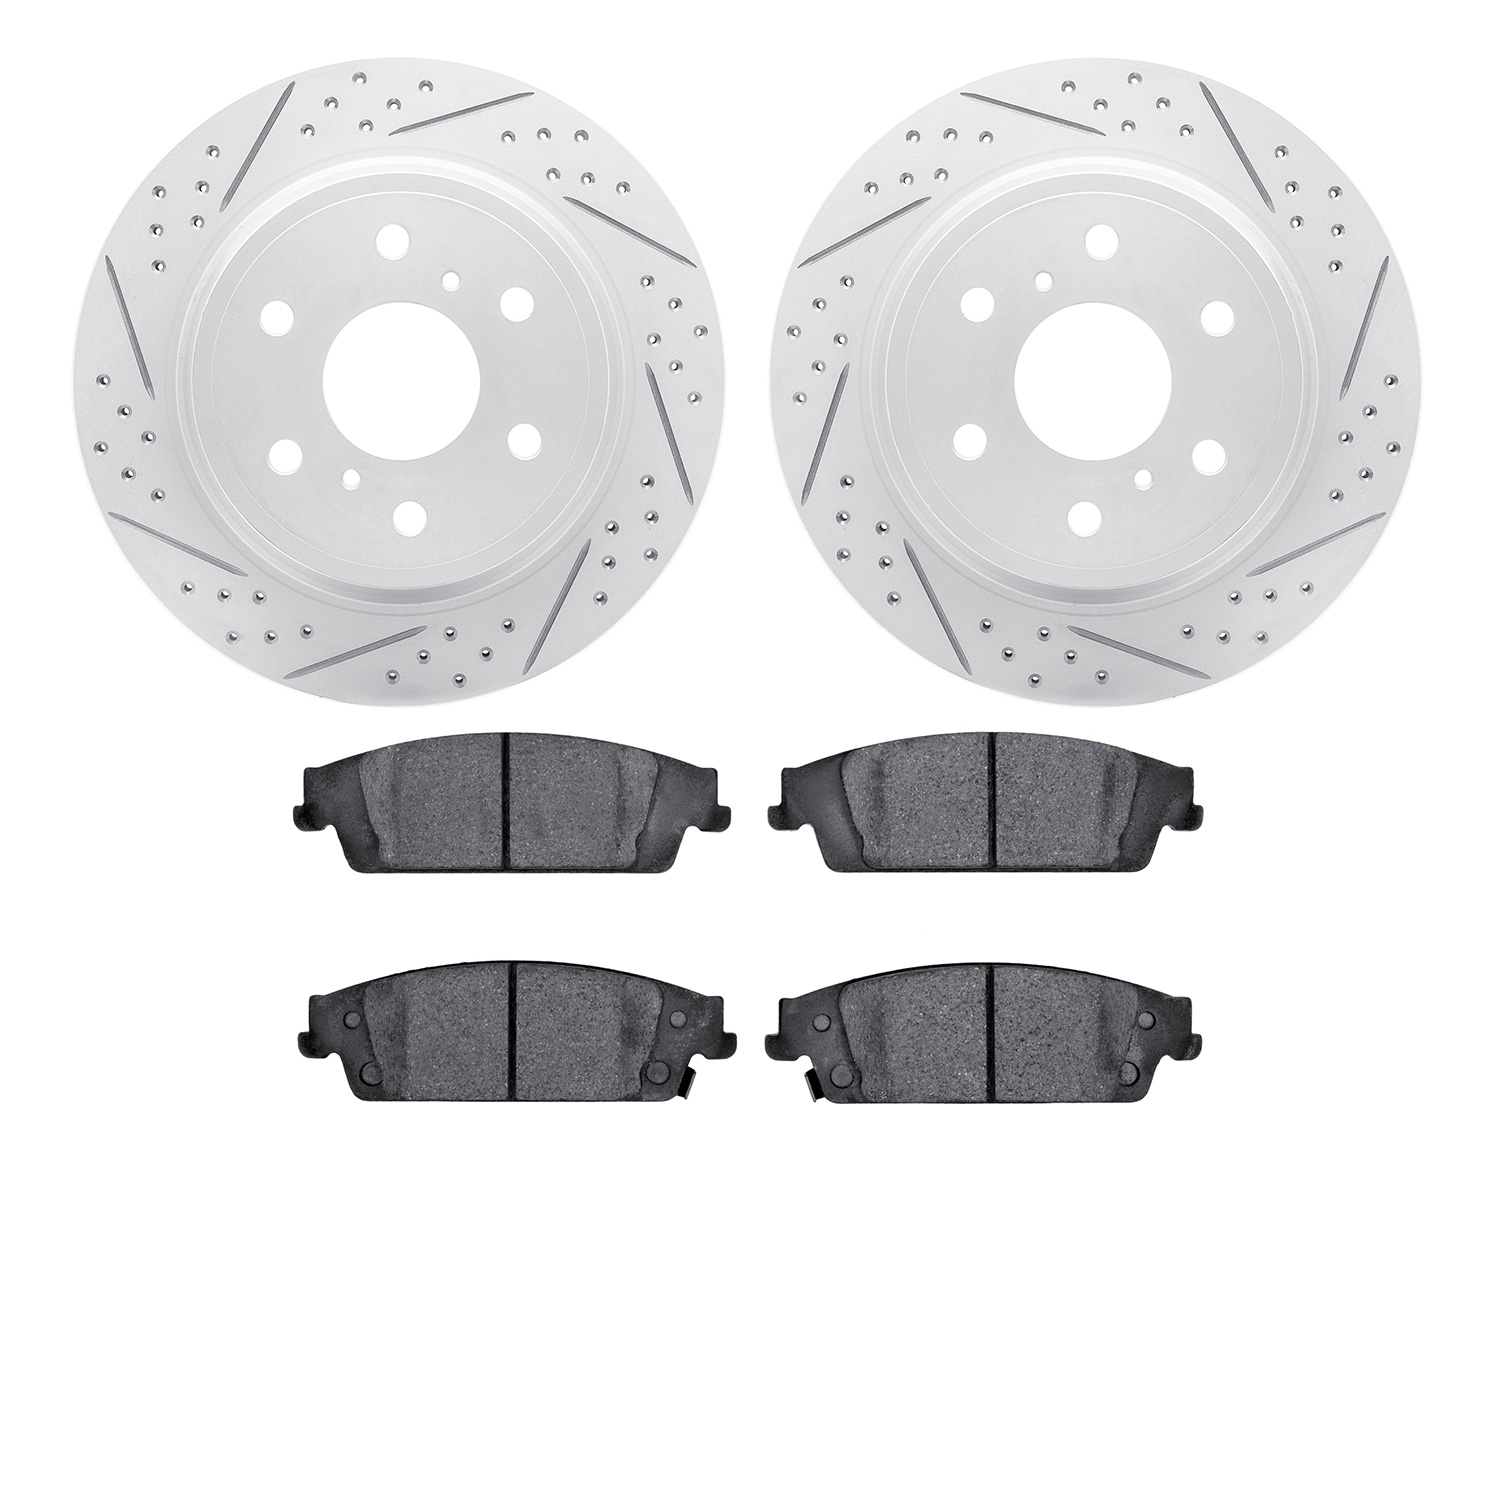 2502-48035 Geoperformance Drilled/Slotted Rotors w/5000 Advanced Brake Pads Kit, 2014-2020 GM, Position: Rear